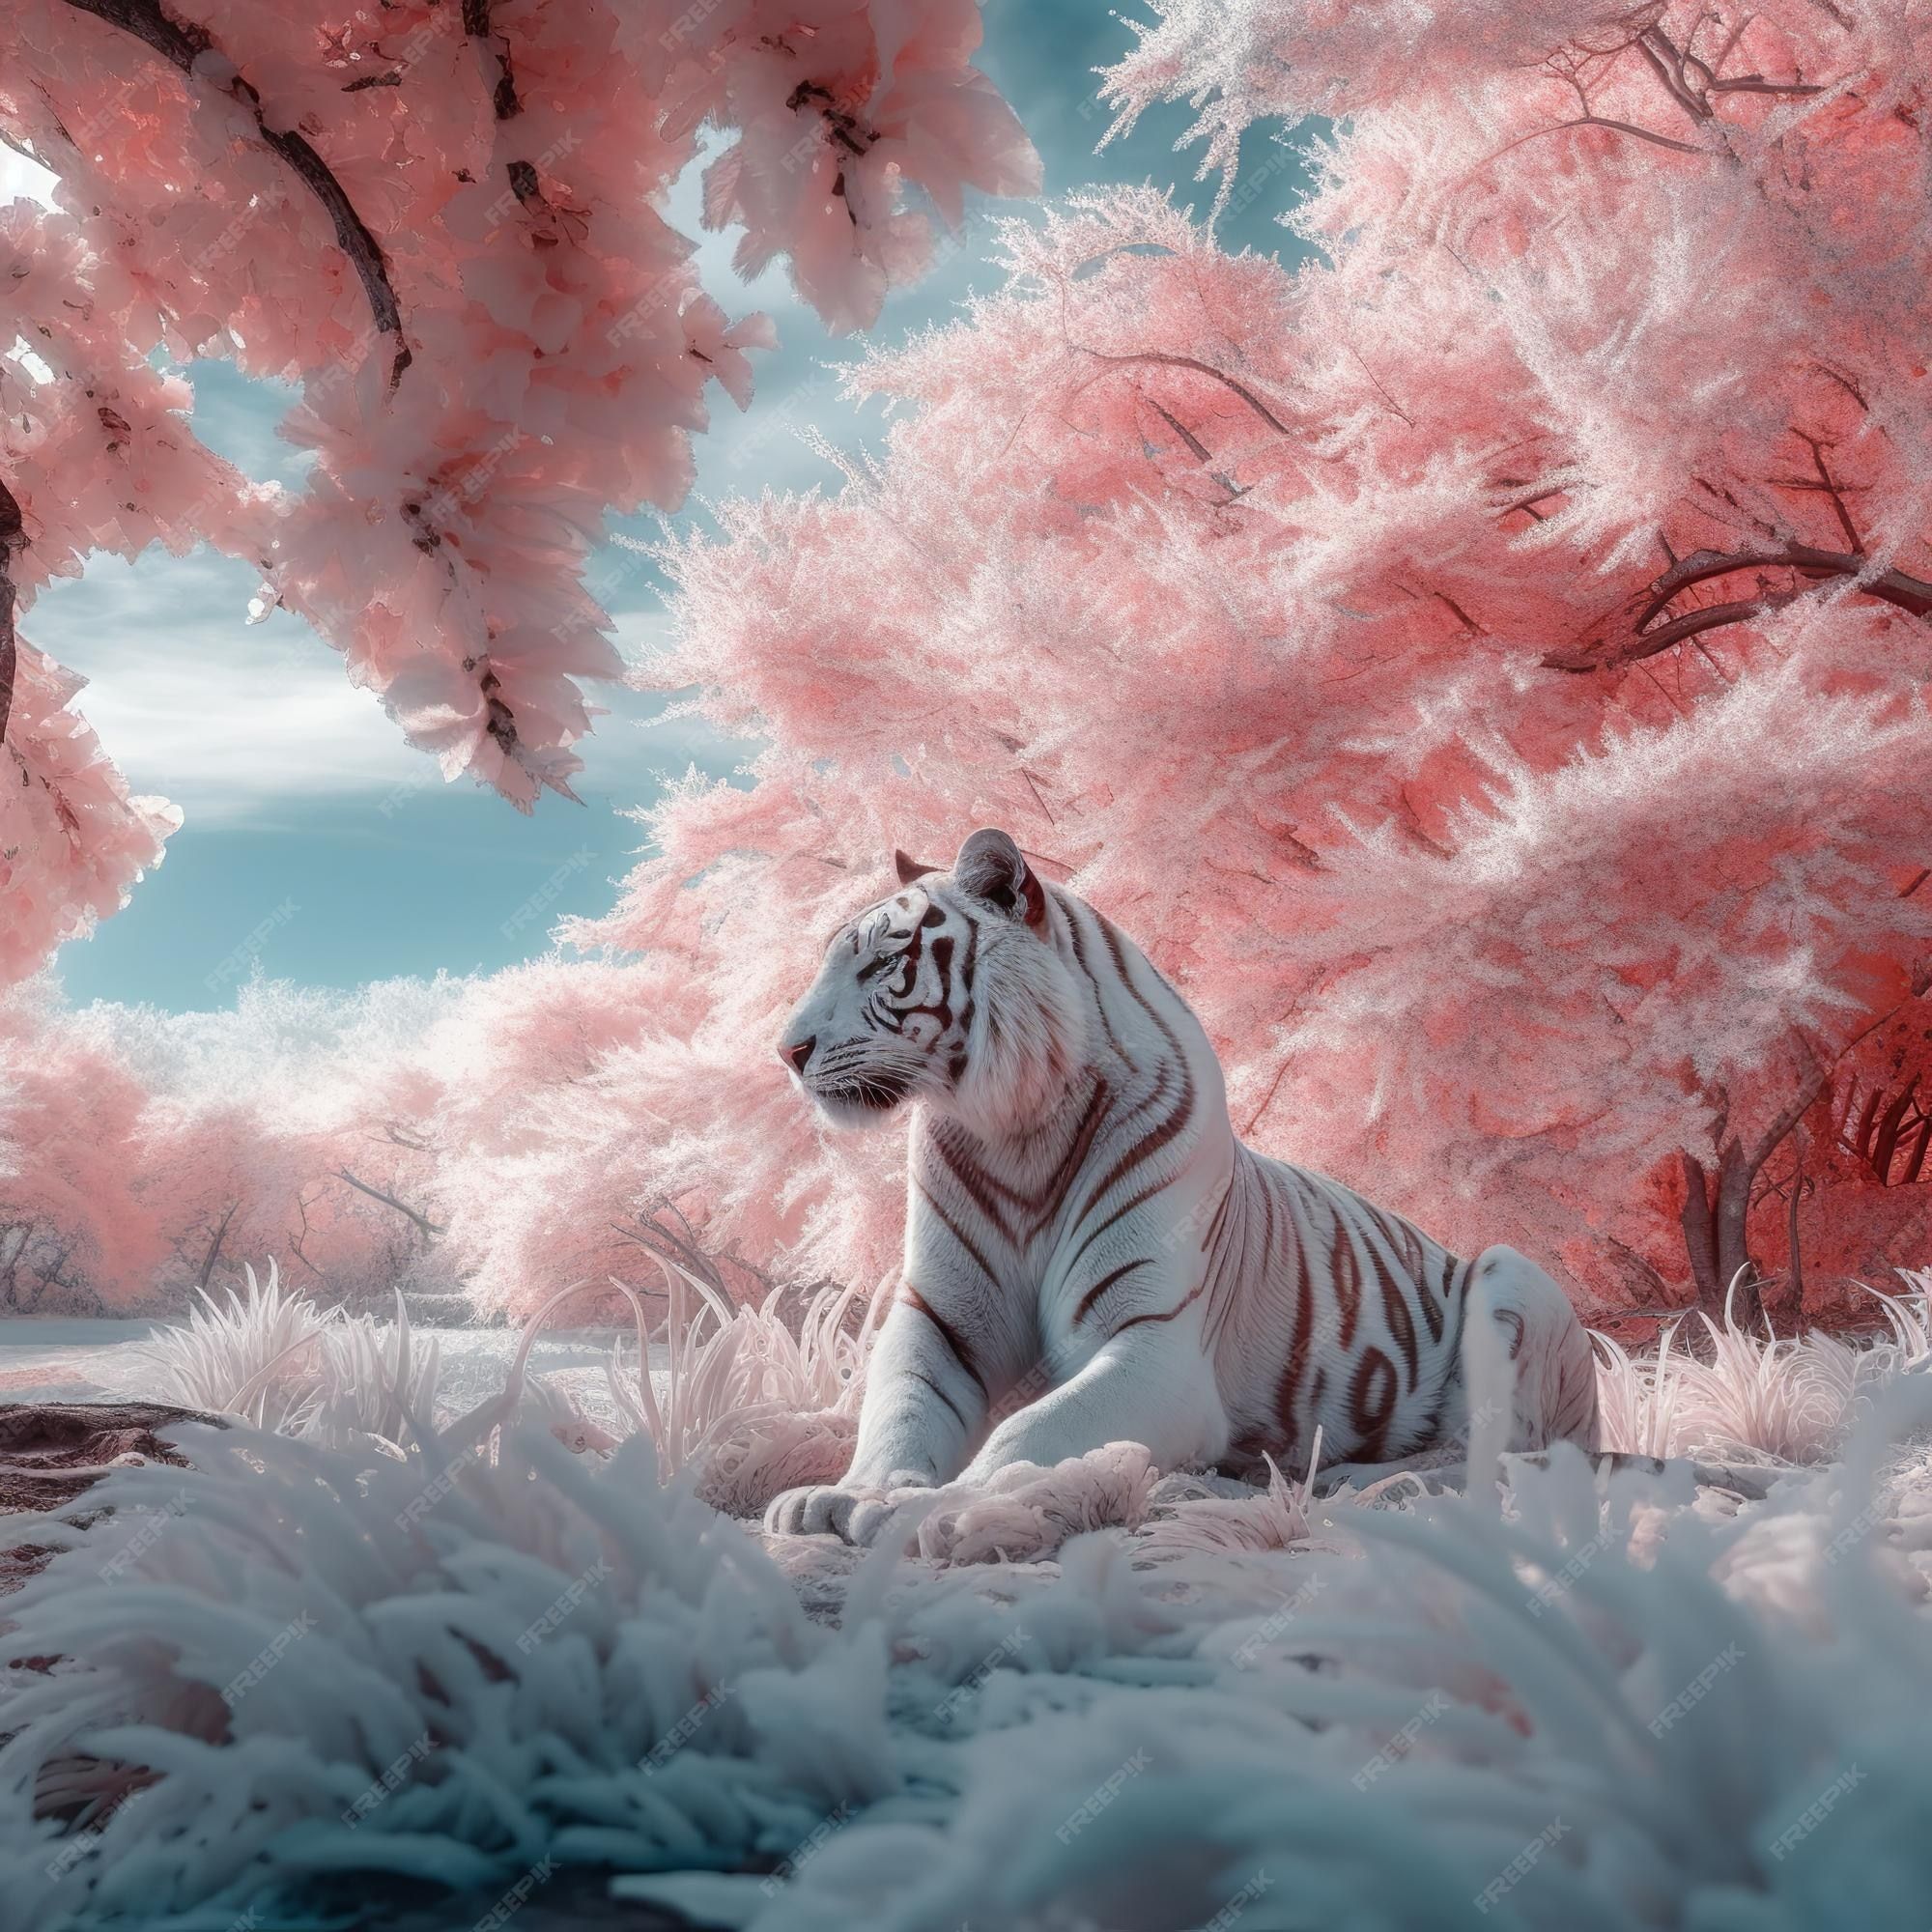 A white tiger resting in a field of flowers - Tiger